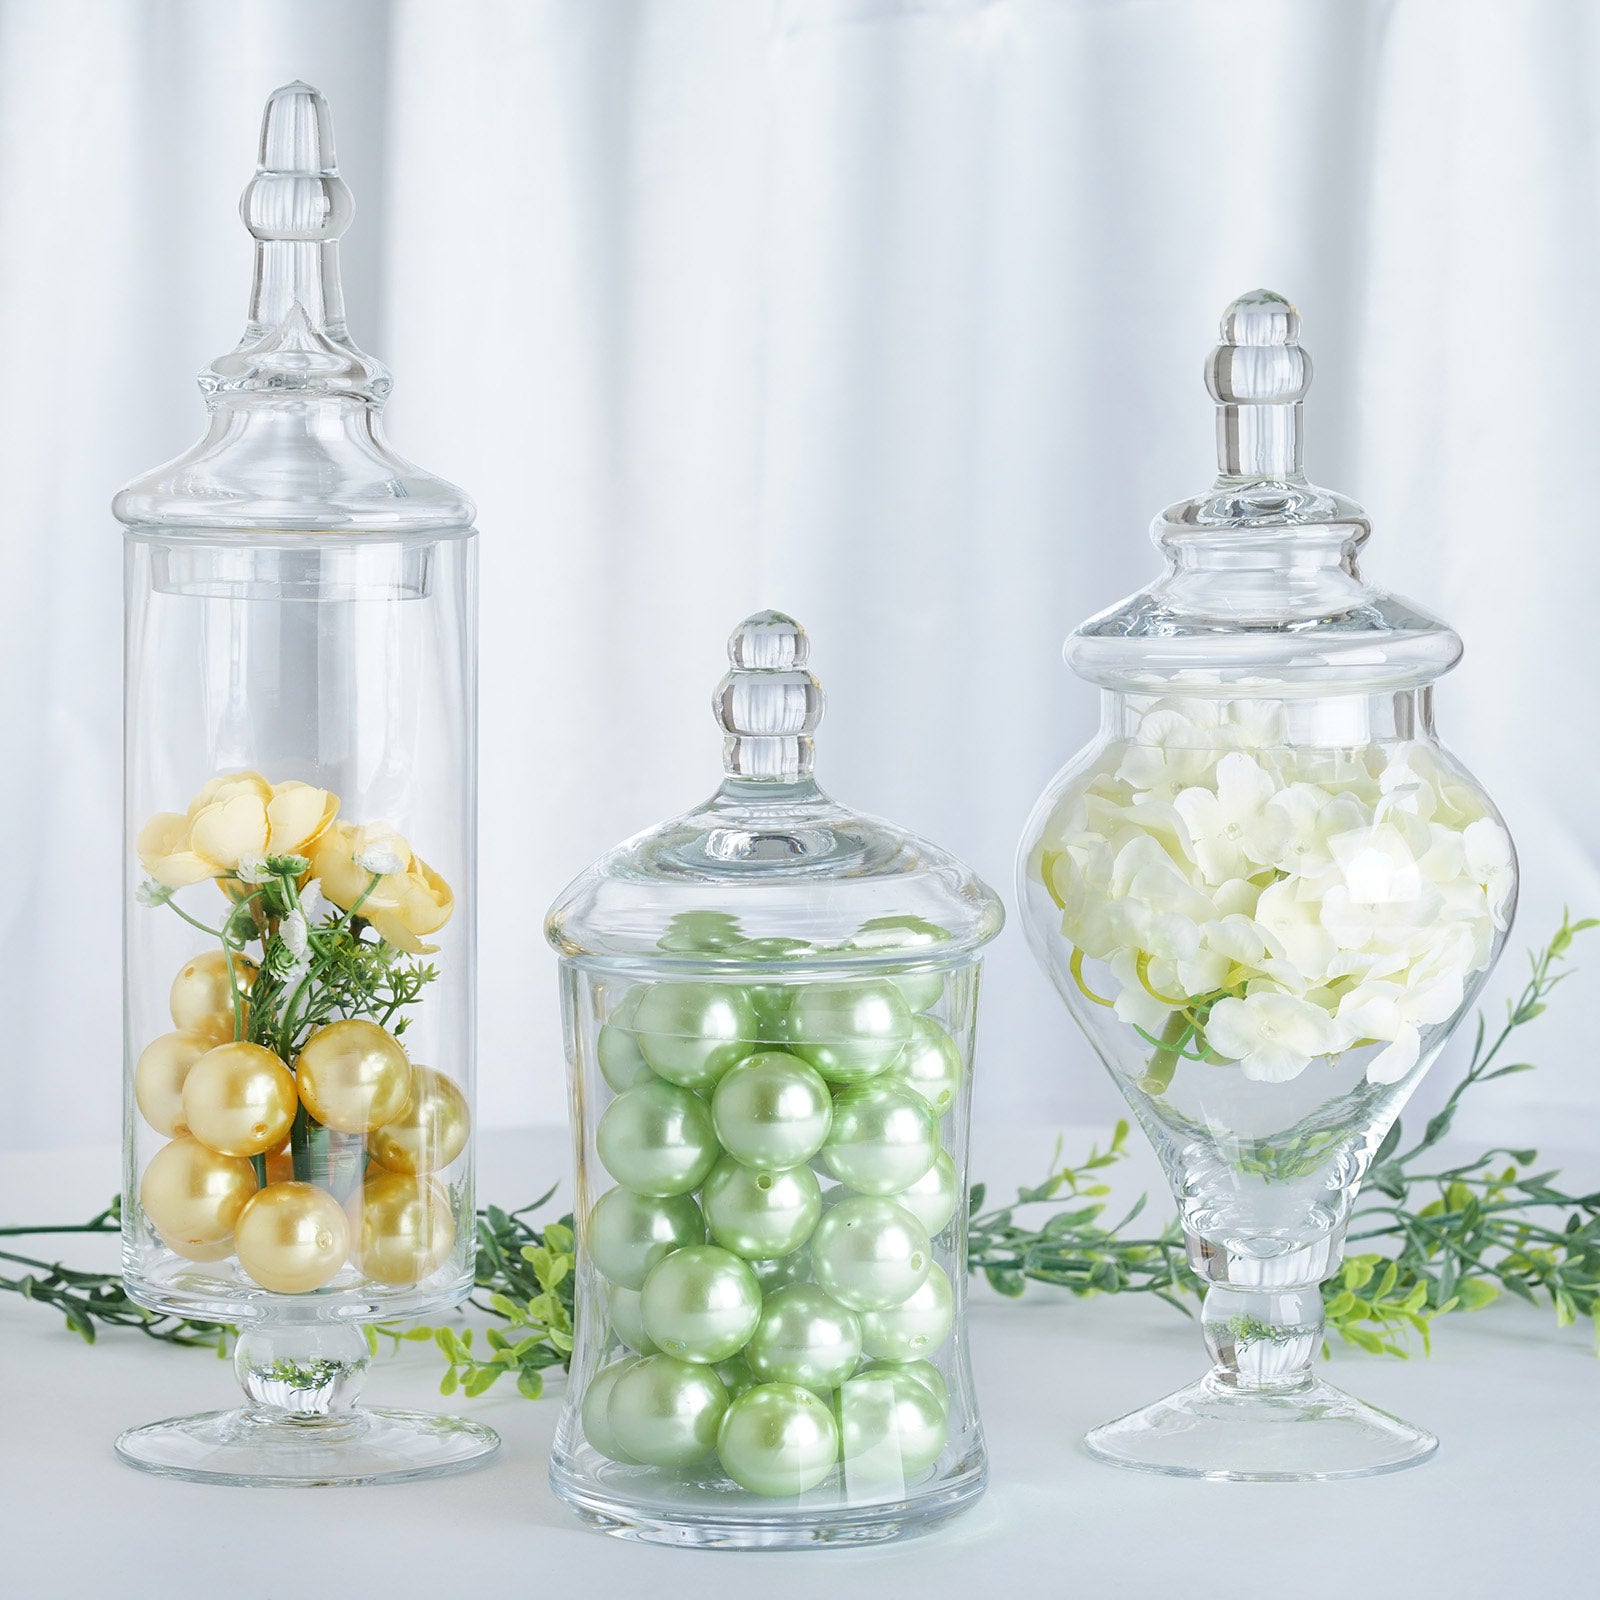 Gold Trim Apothecary Jars, Glass Candy Jars With Lids